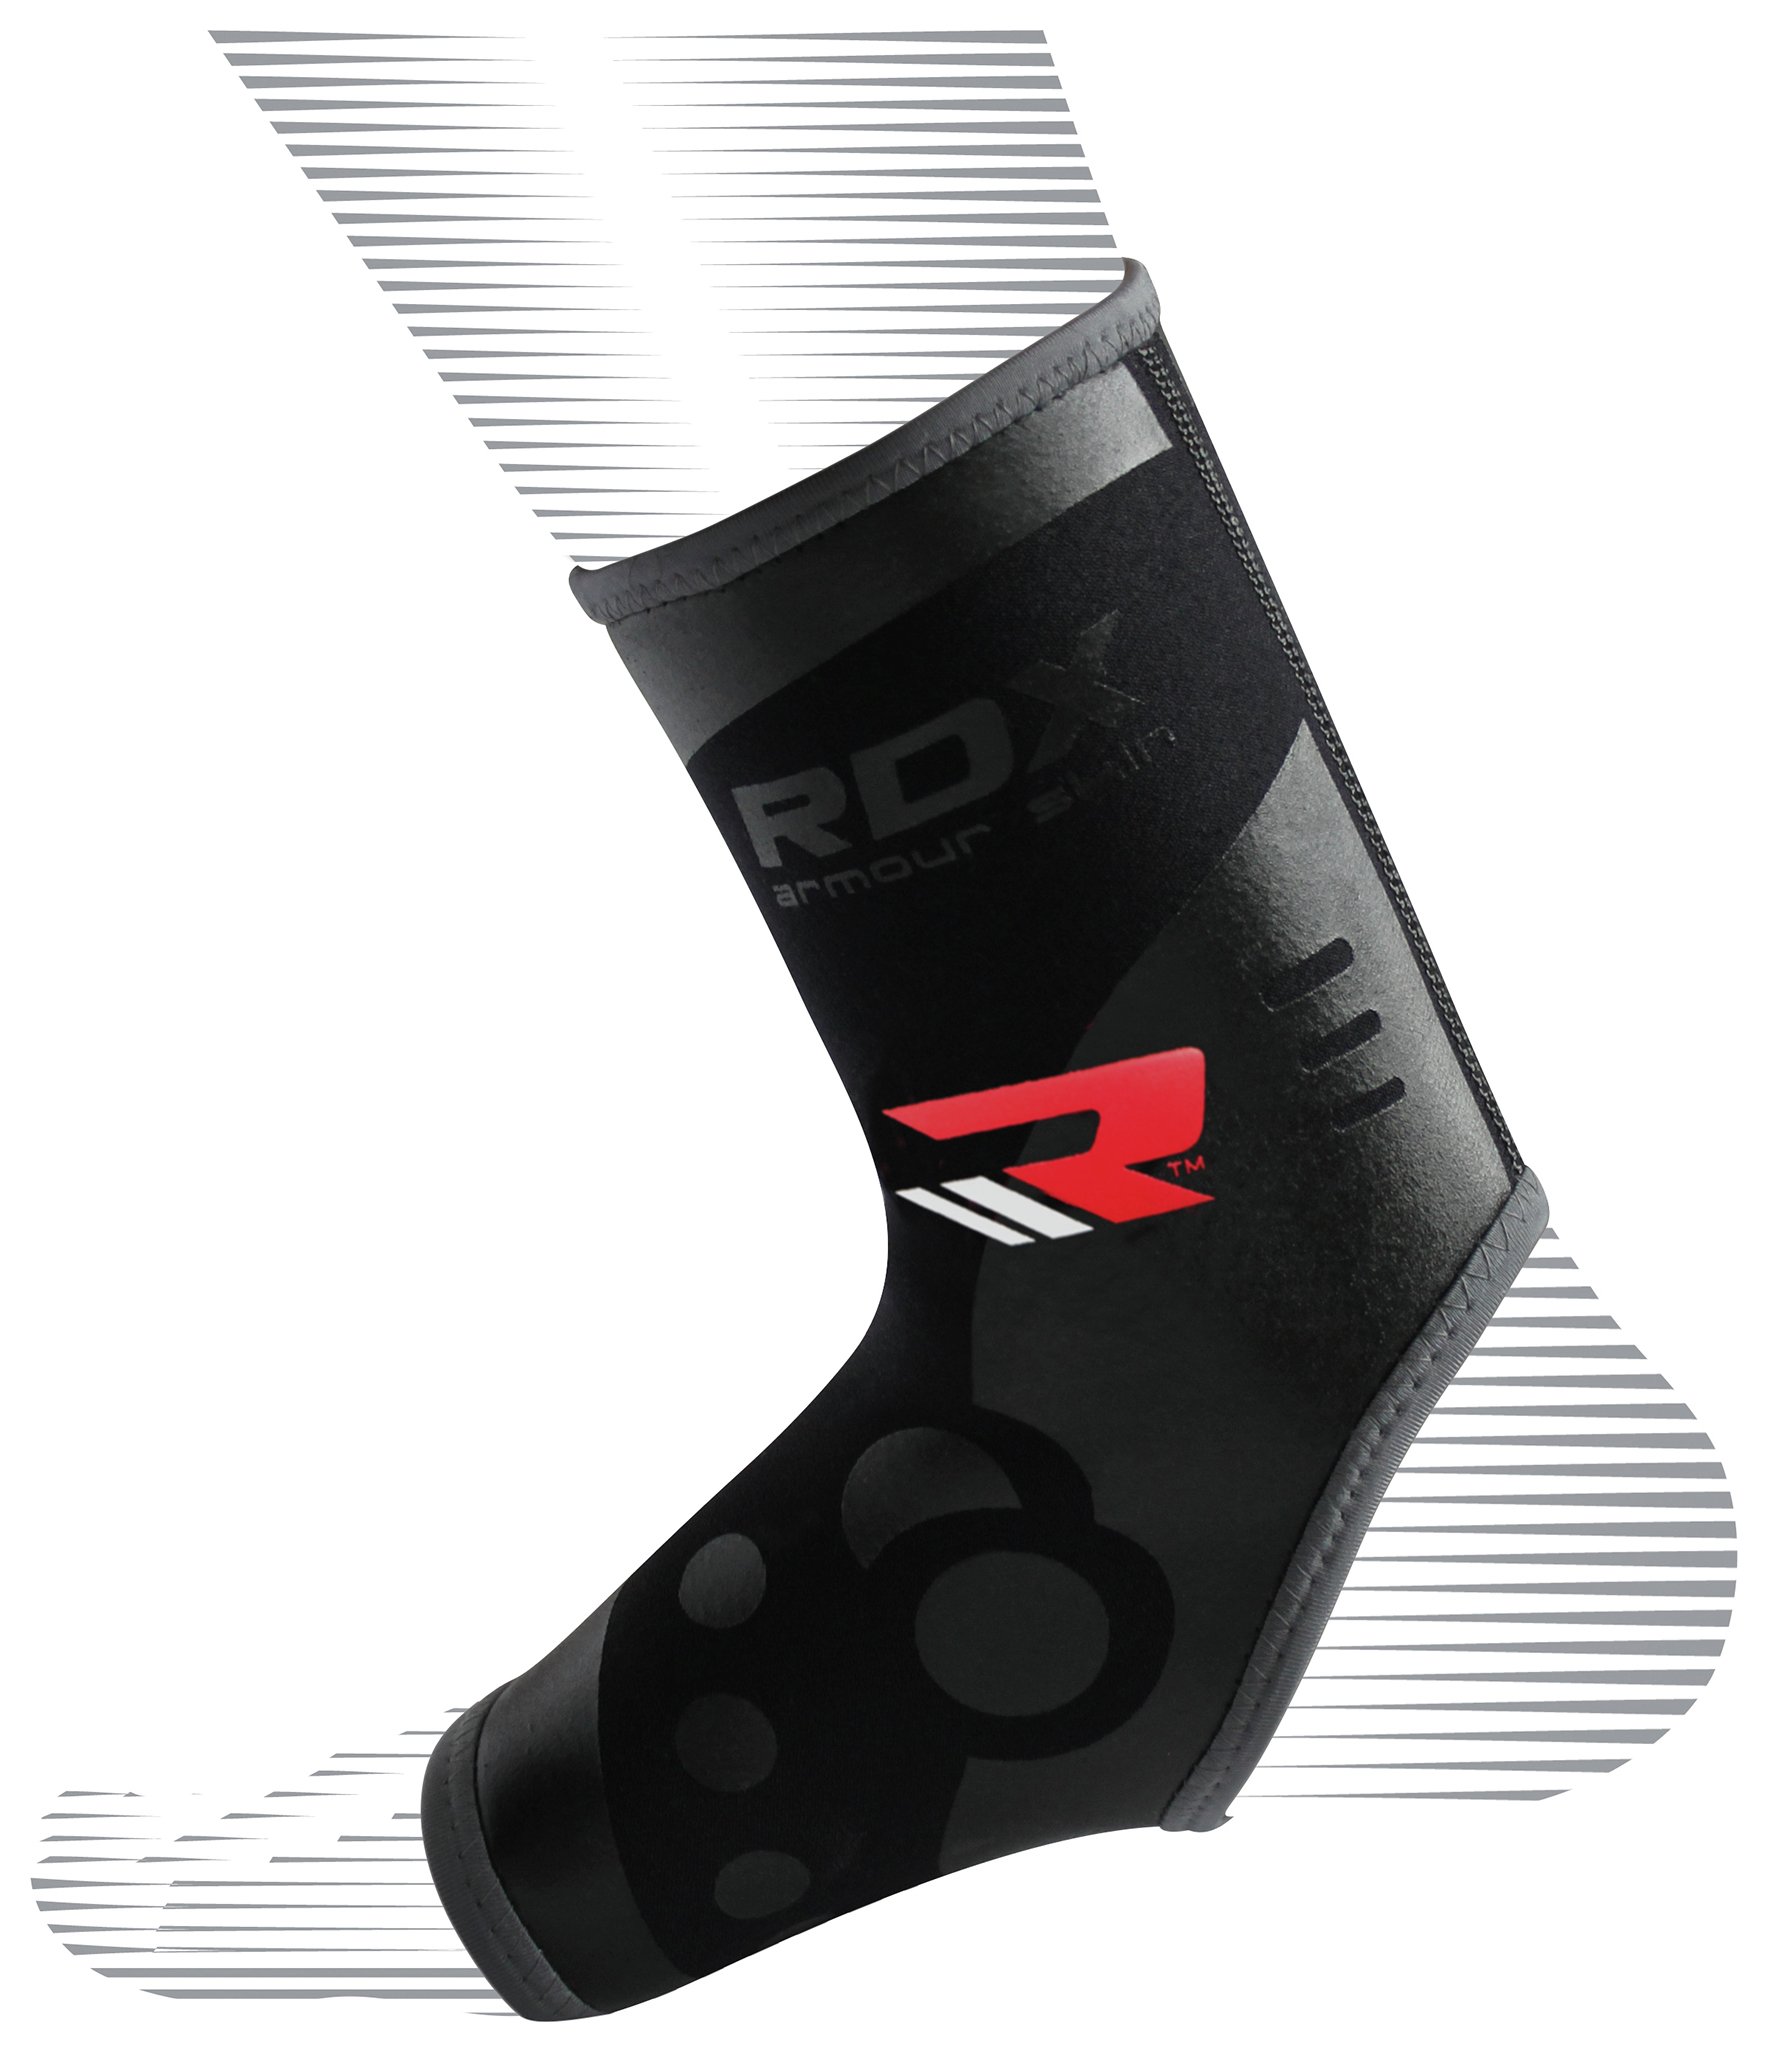 RDX Medium to Large Ankle Support - Black.